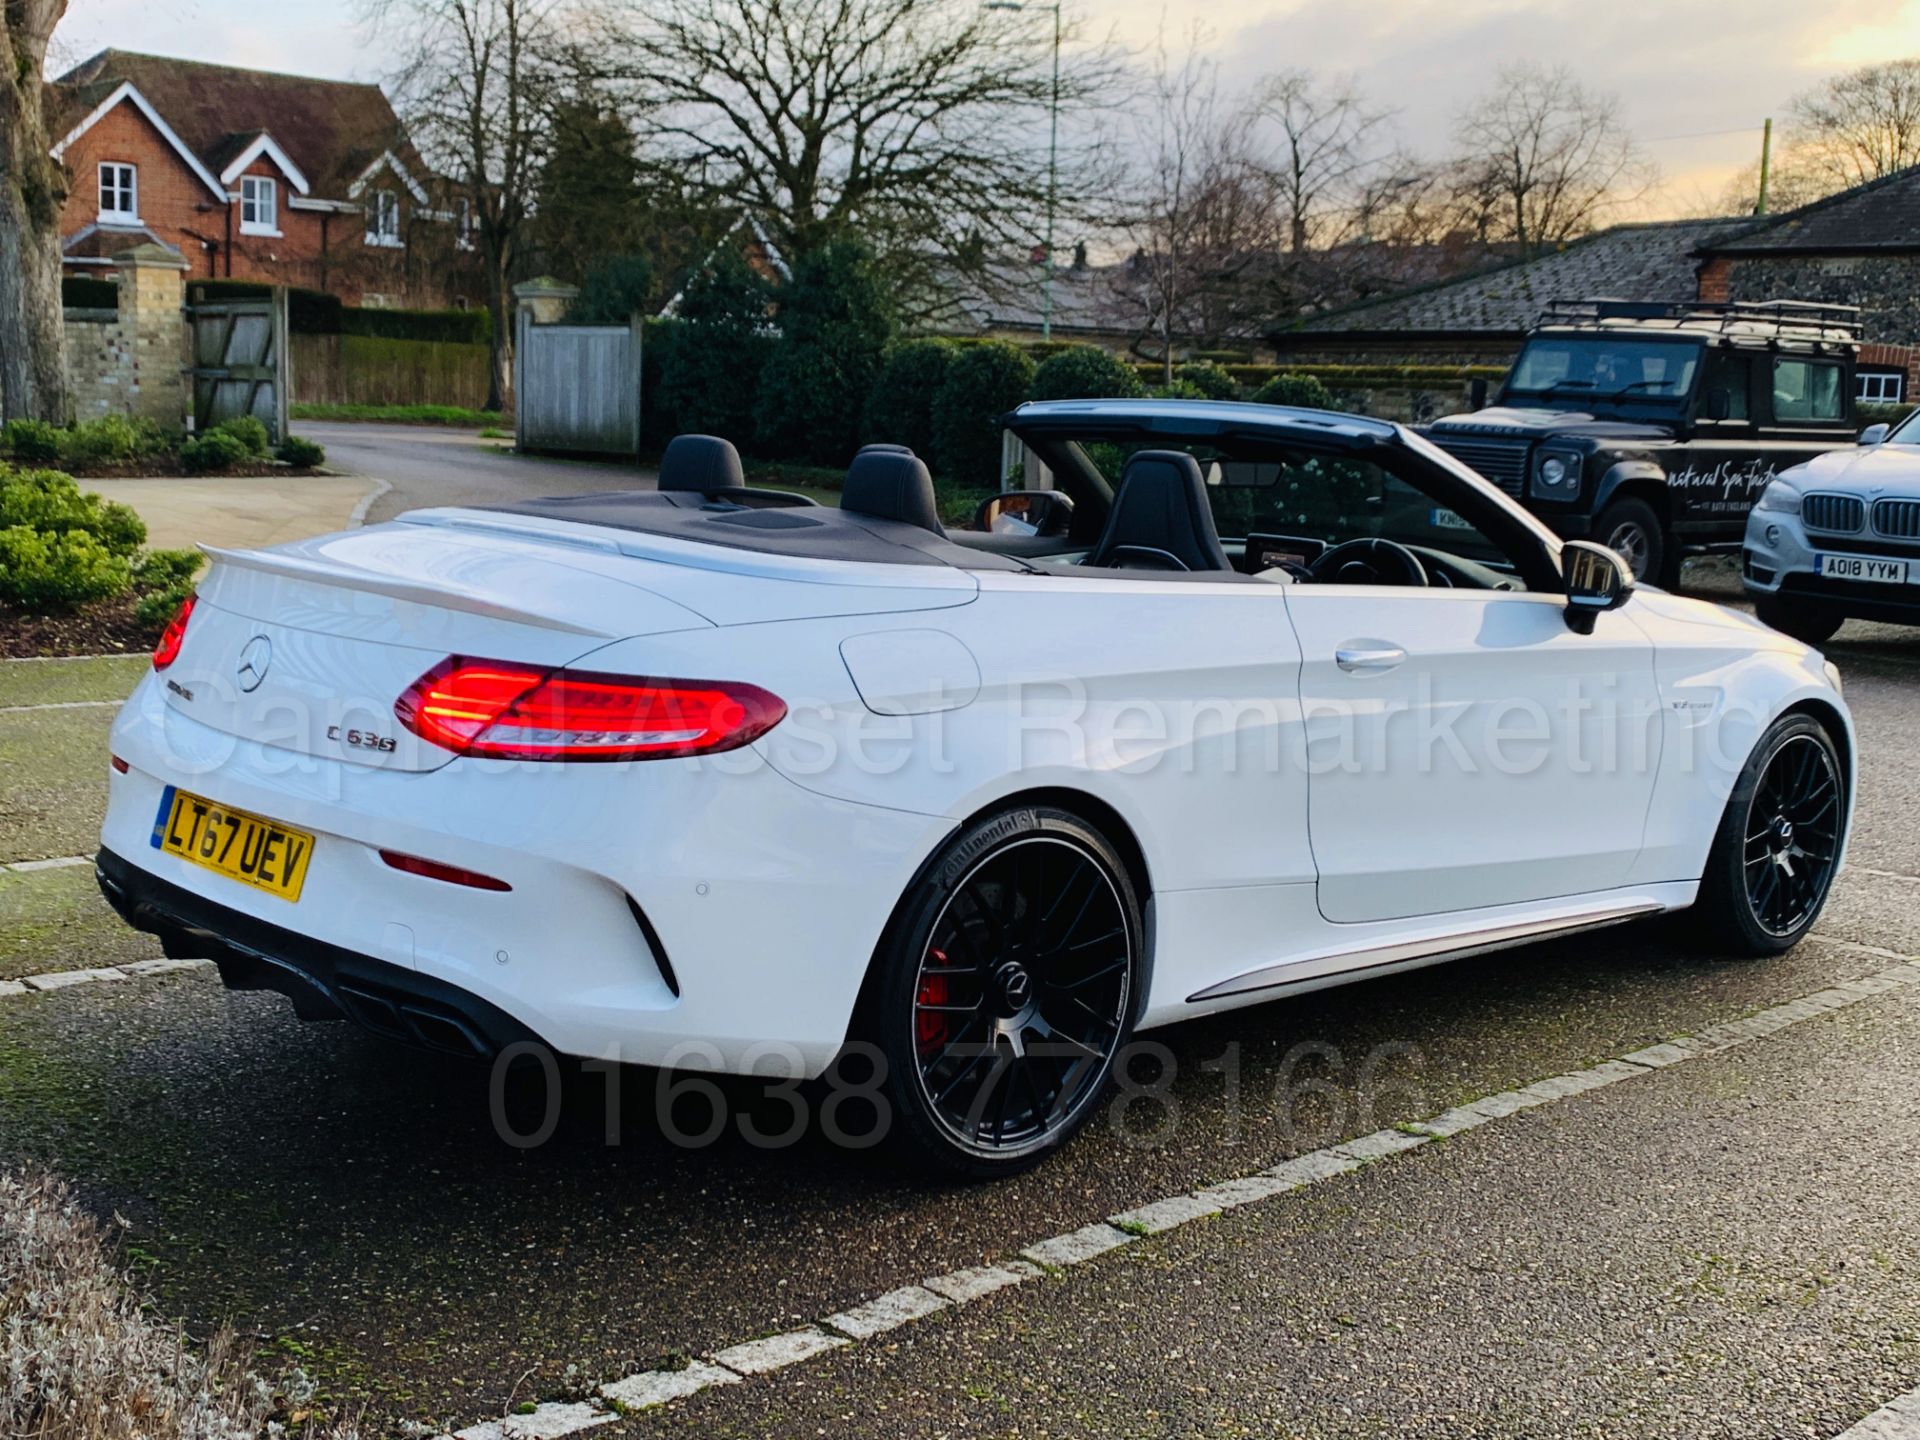 (On Sale) MERCEDES-BENZ AMG C63-S *CABRIOLET* (67 REG) '4.0 BI-TURBO -510 BHP - AUTO' *FULLY LOADED* - Image 23 of 79